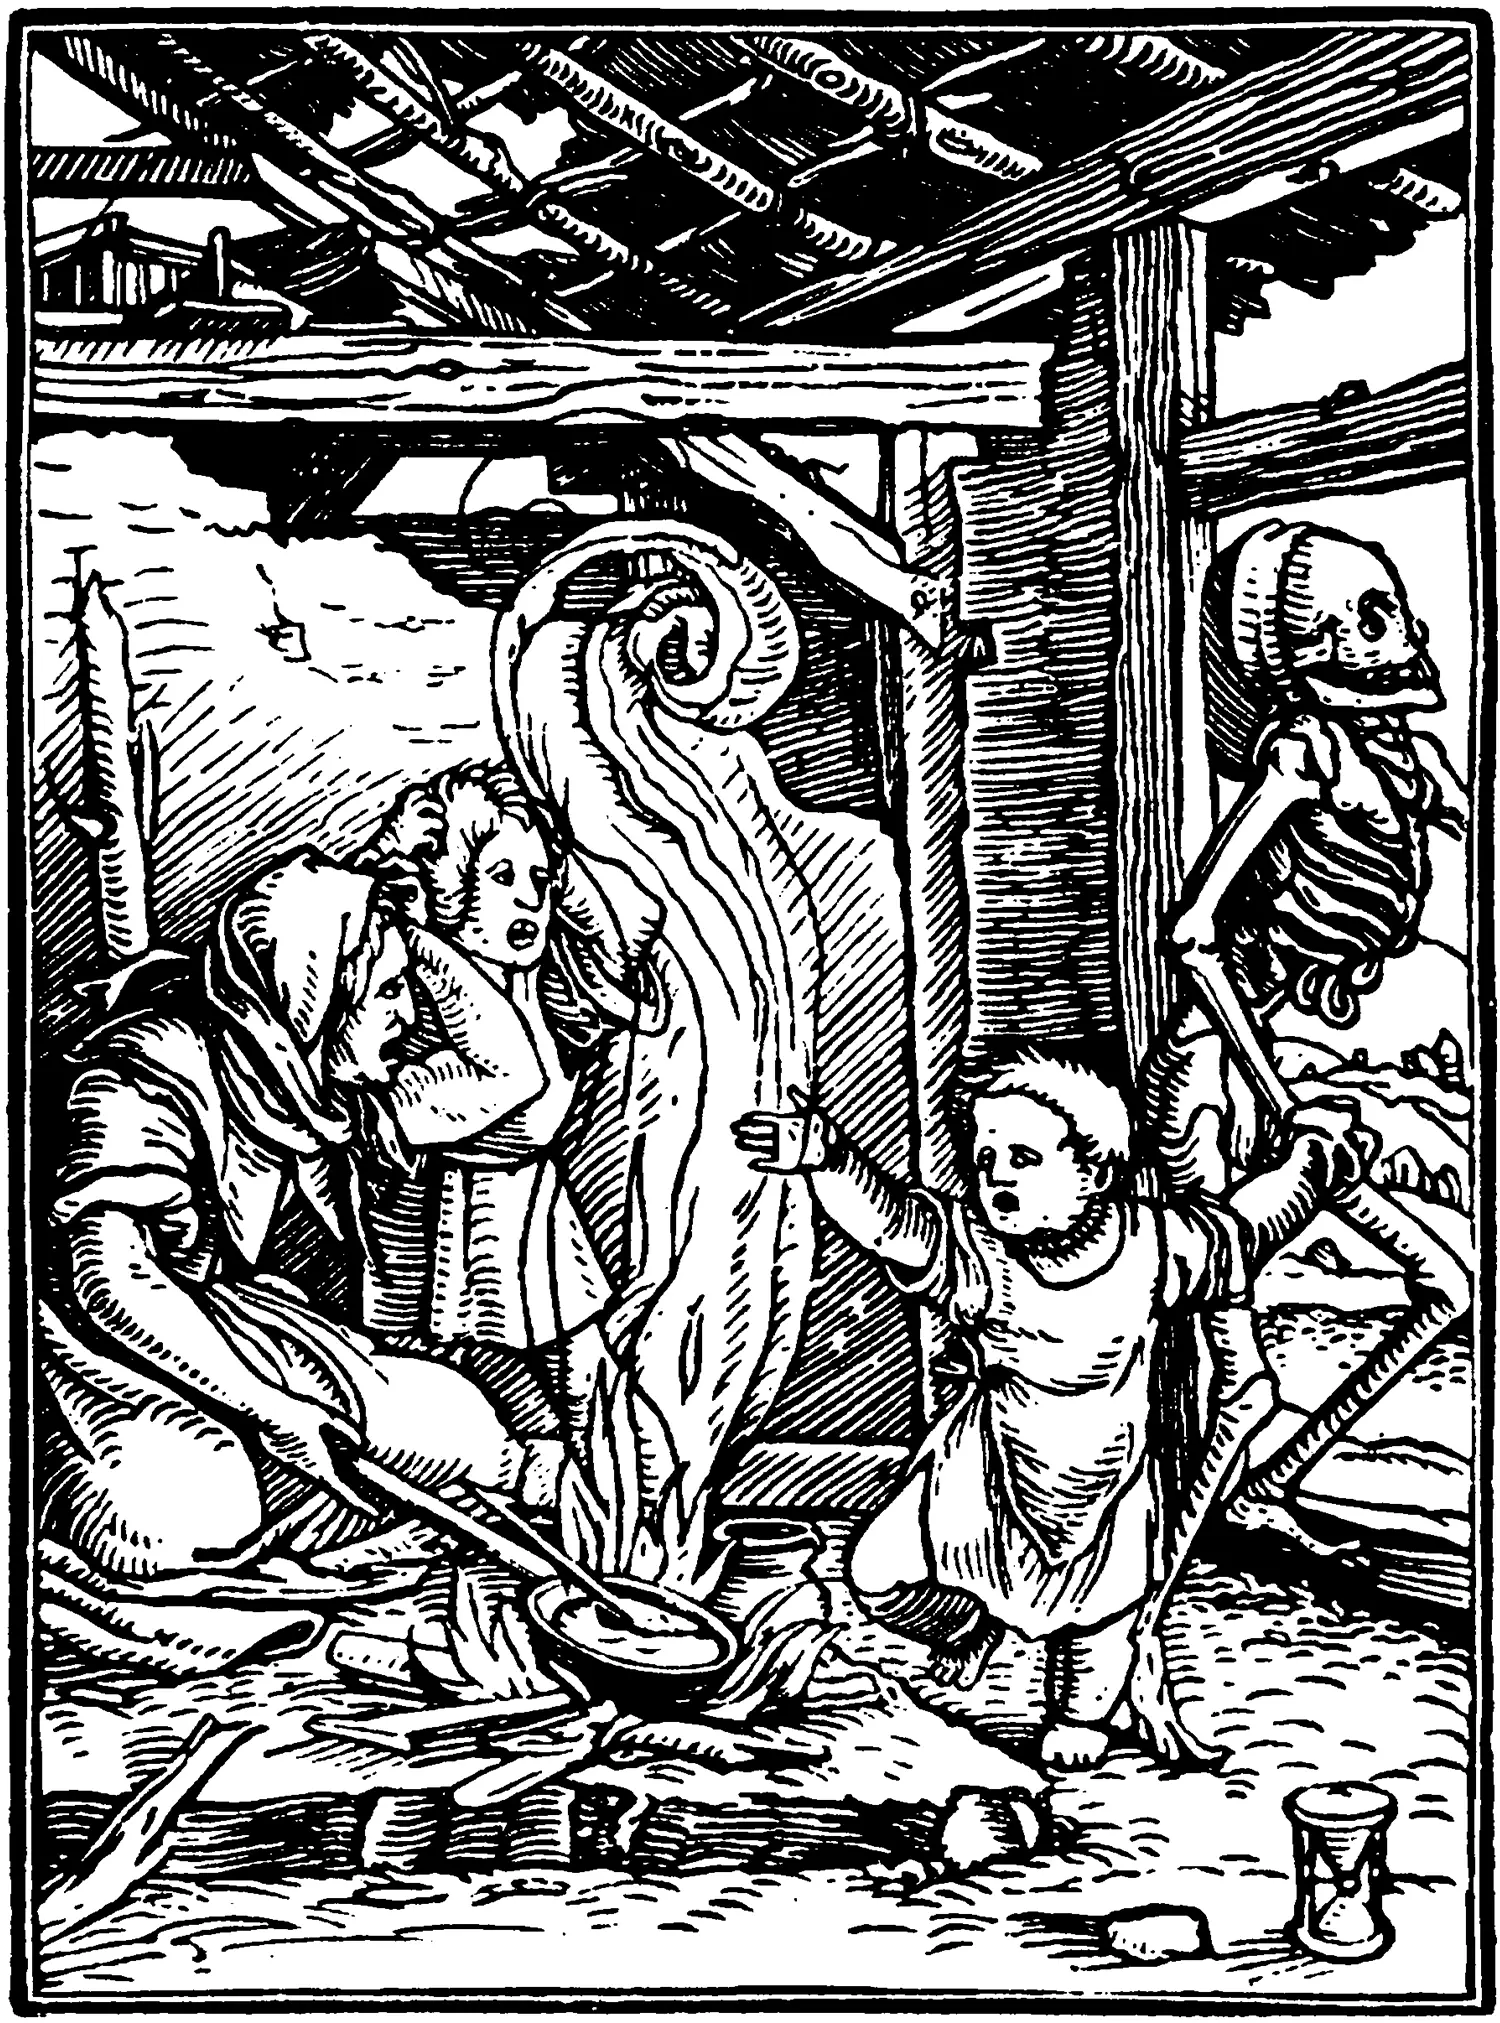 Two adults stare in distress as a skeleton leads their small child out of the building.